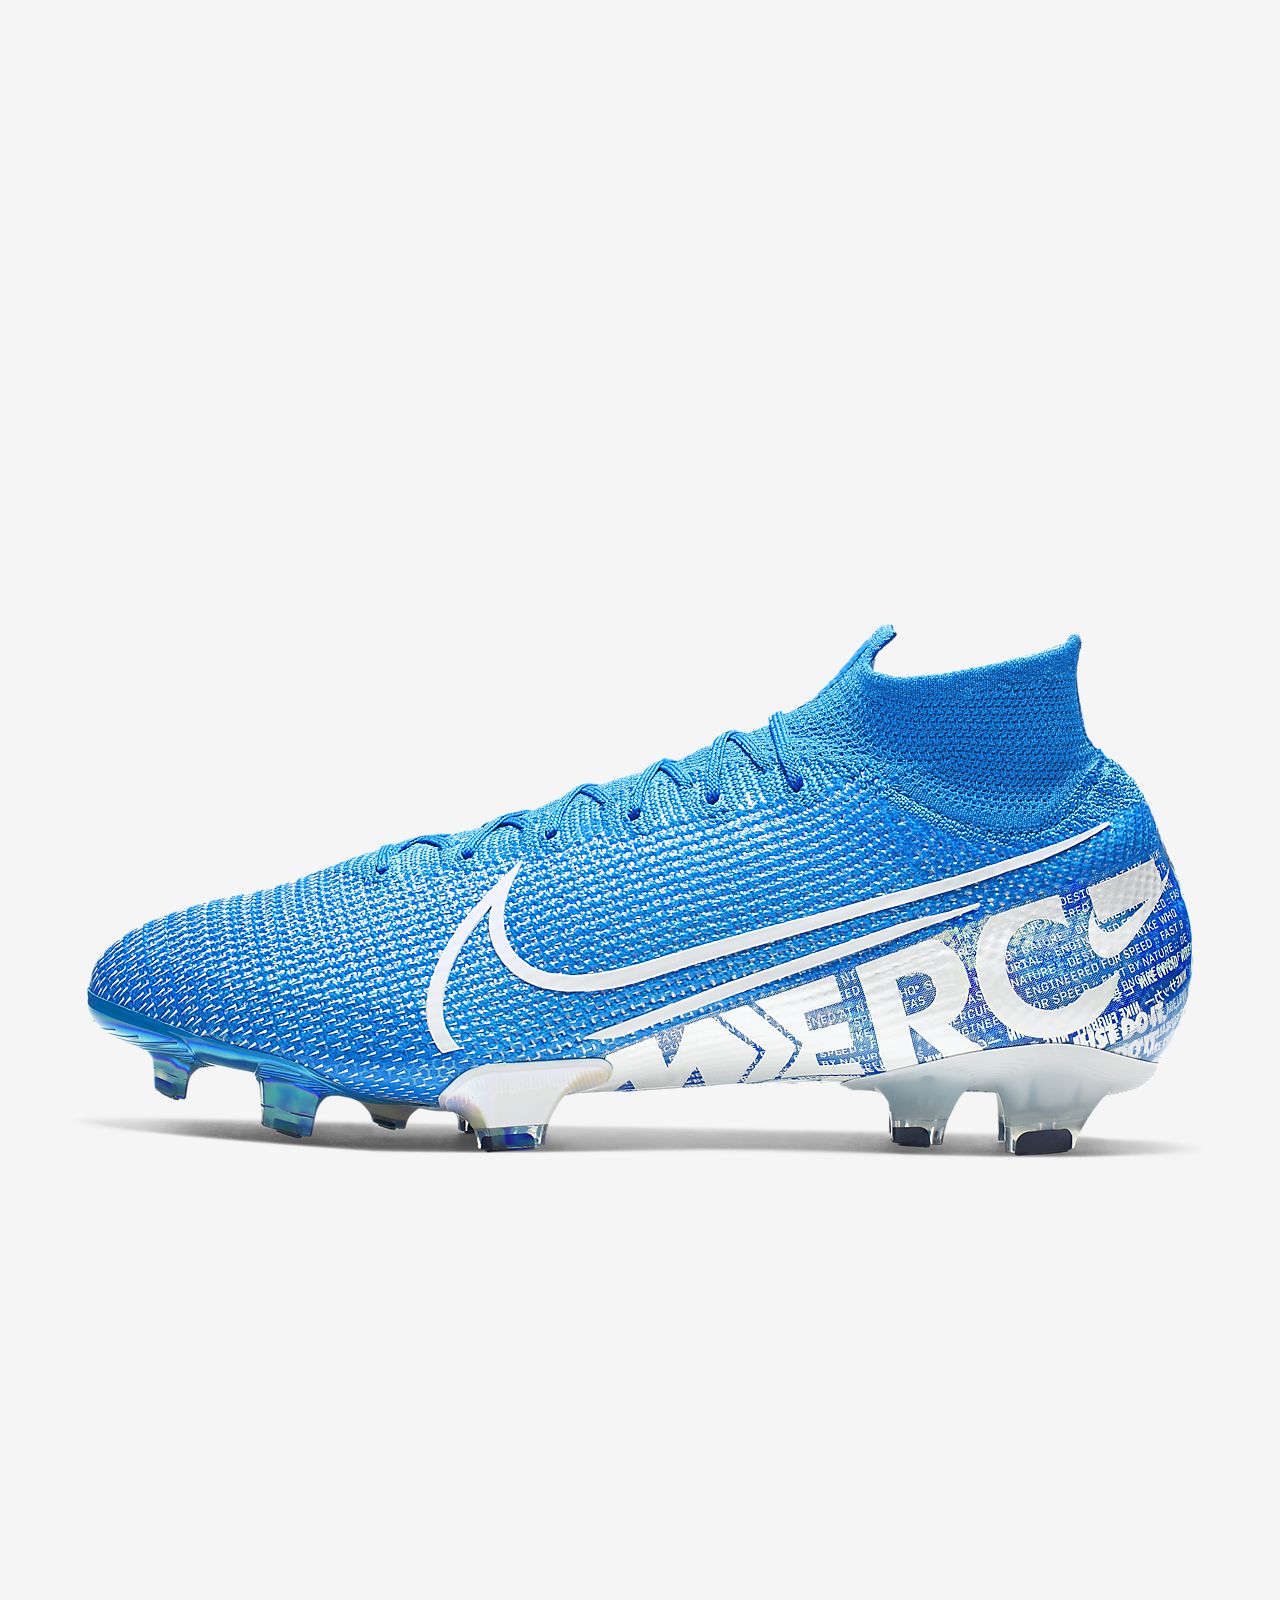 Nike Mercurial Superfly 360 Elite LVL UP SE FG Firm Ground